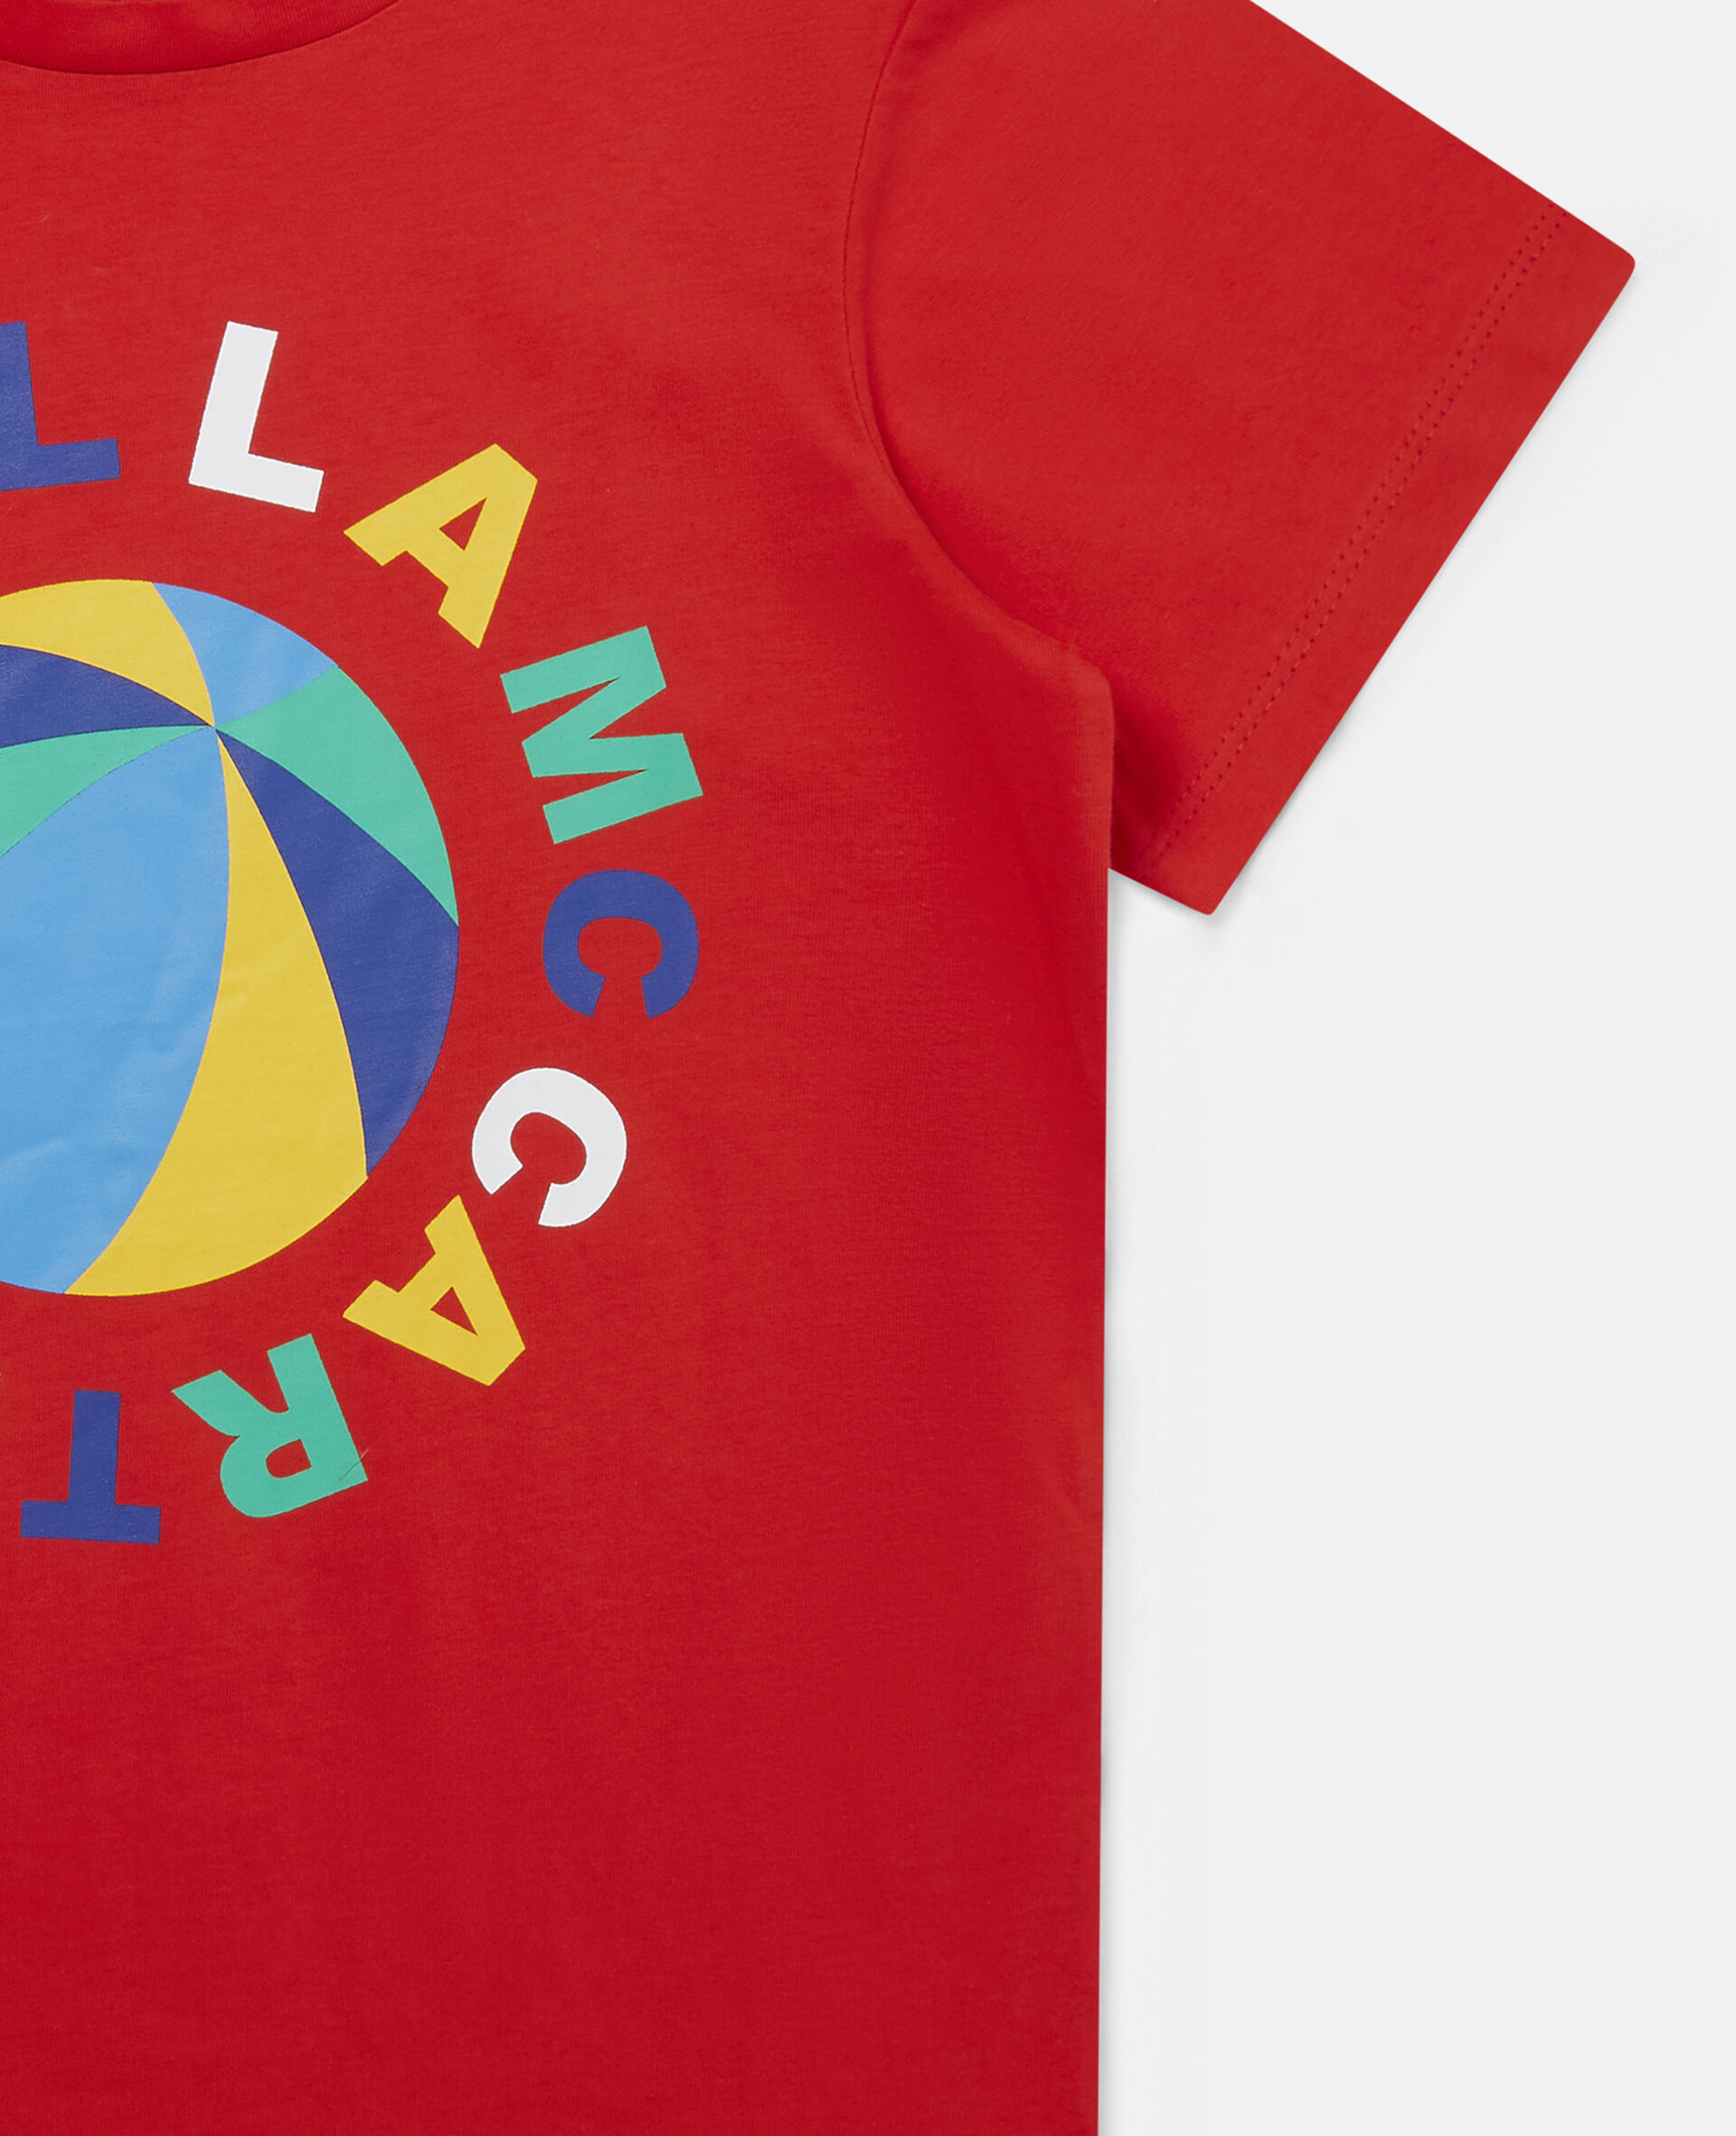 Beach Ball Logo Print Cotton T-Shirt-Red-large image number 1